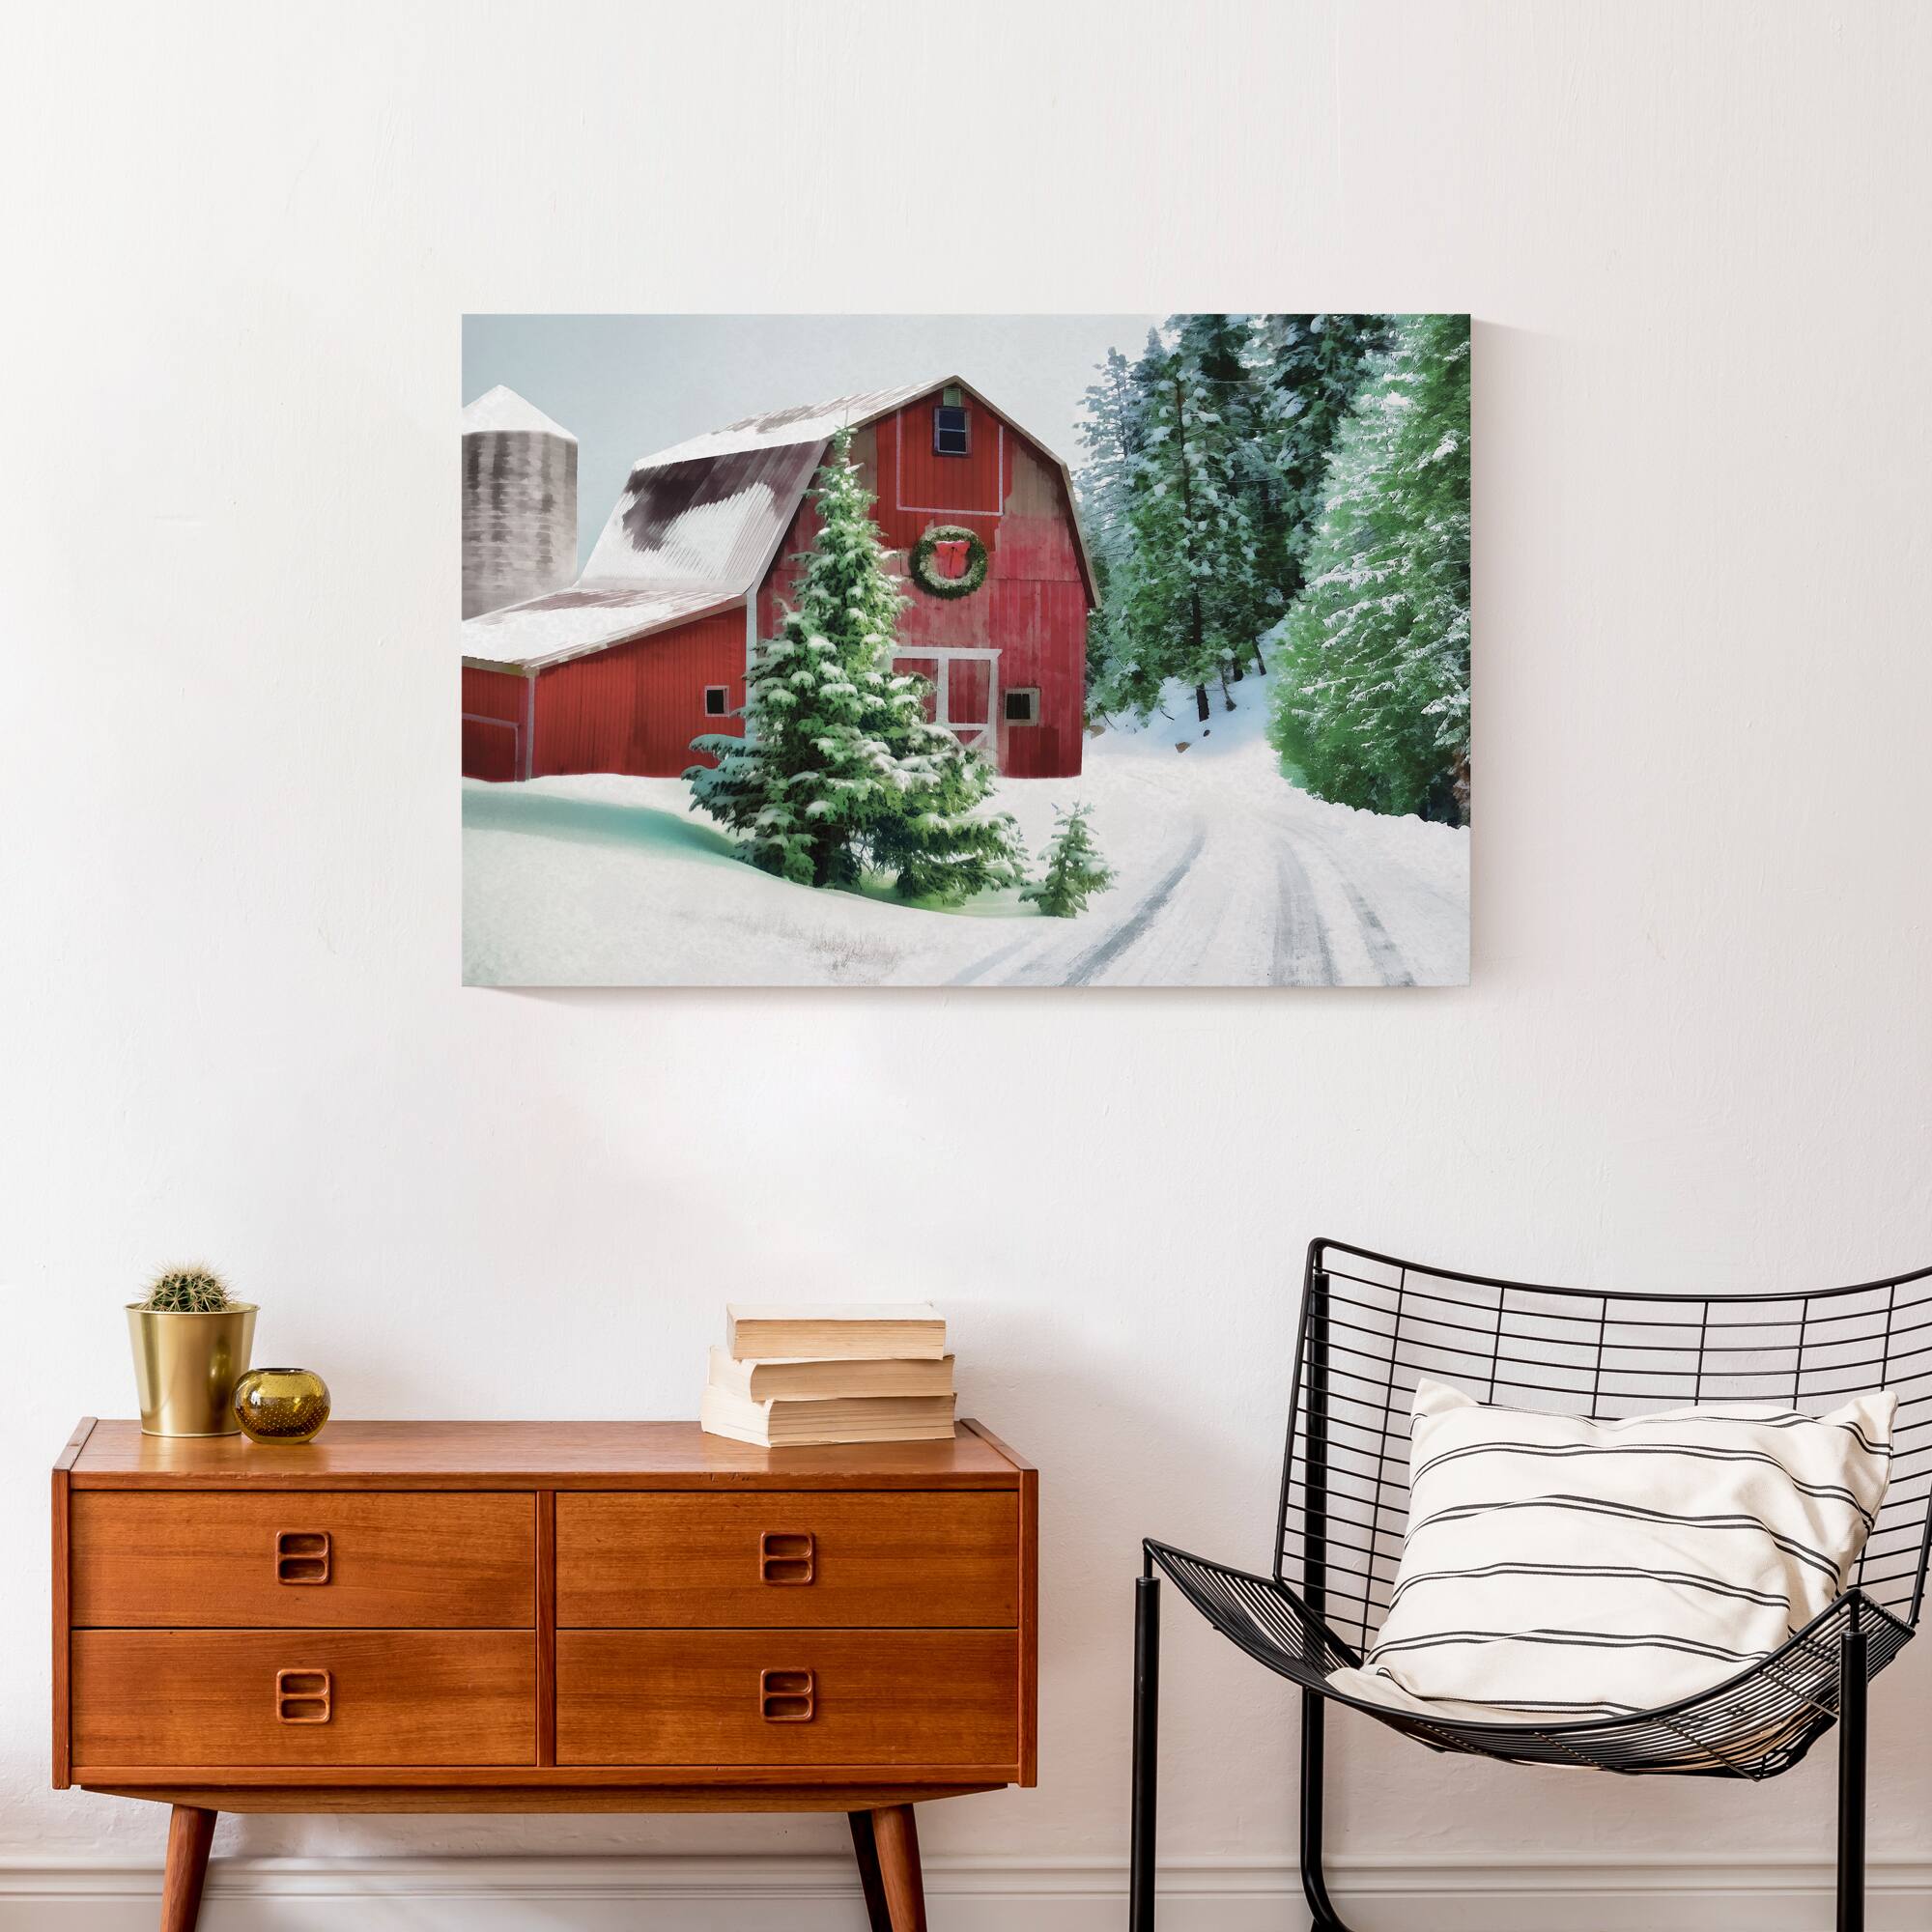 Painted, Snowy Red Barn 30x20 Canvas Wall Art | Christmas Wall Decor ...